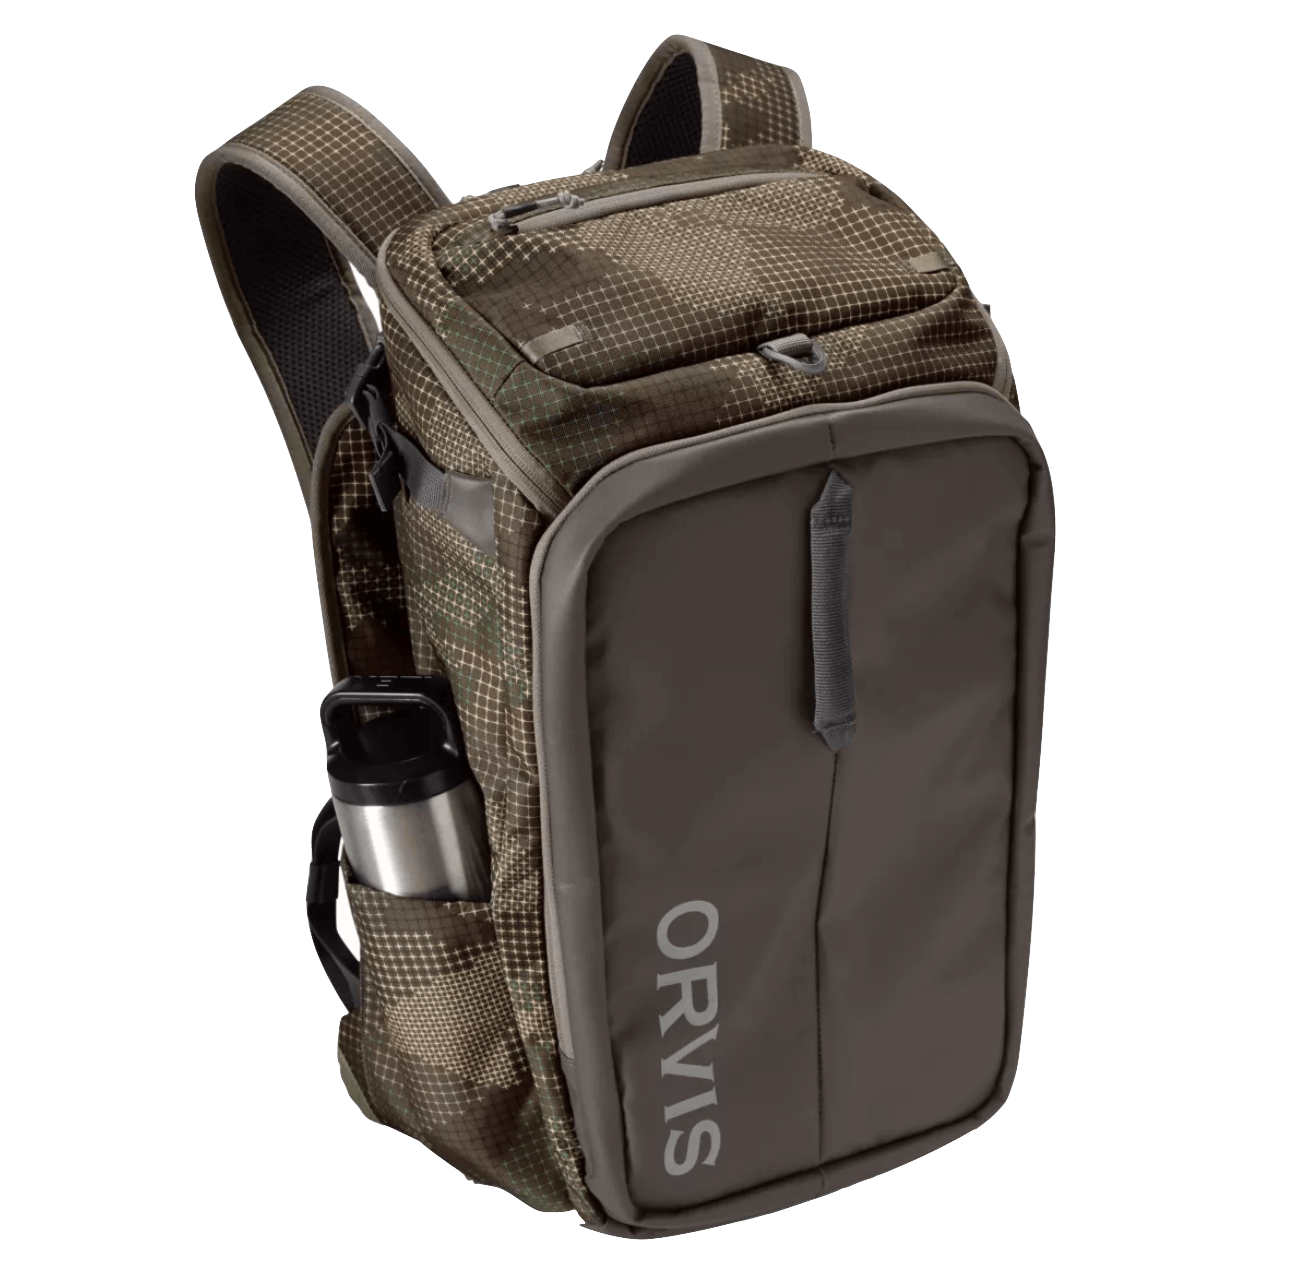 Product image of the Orvis Bug Out backpack.